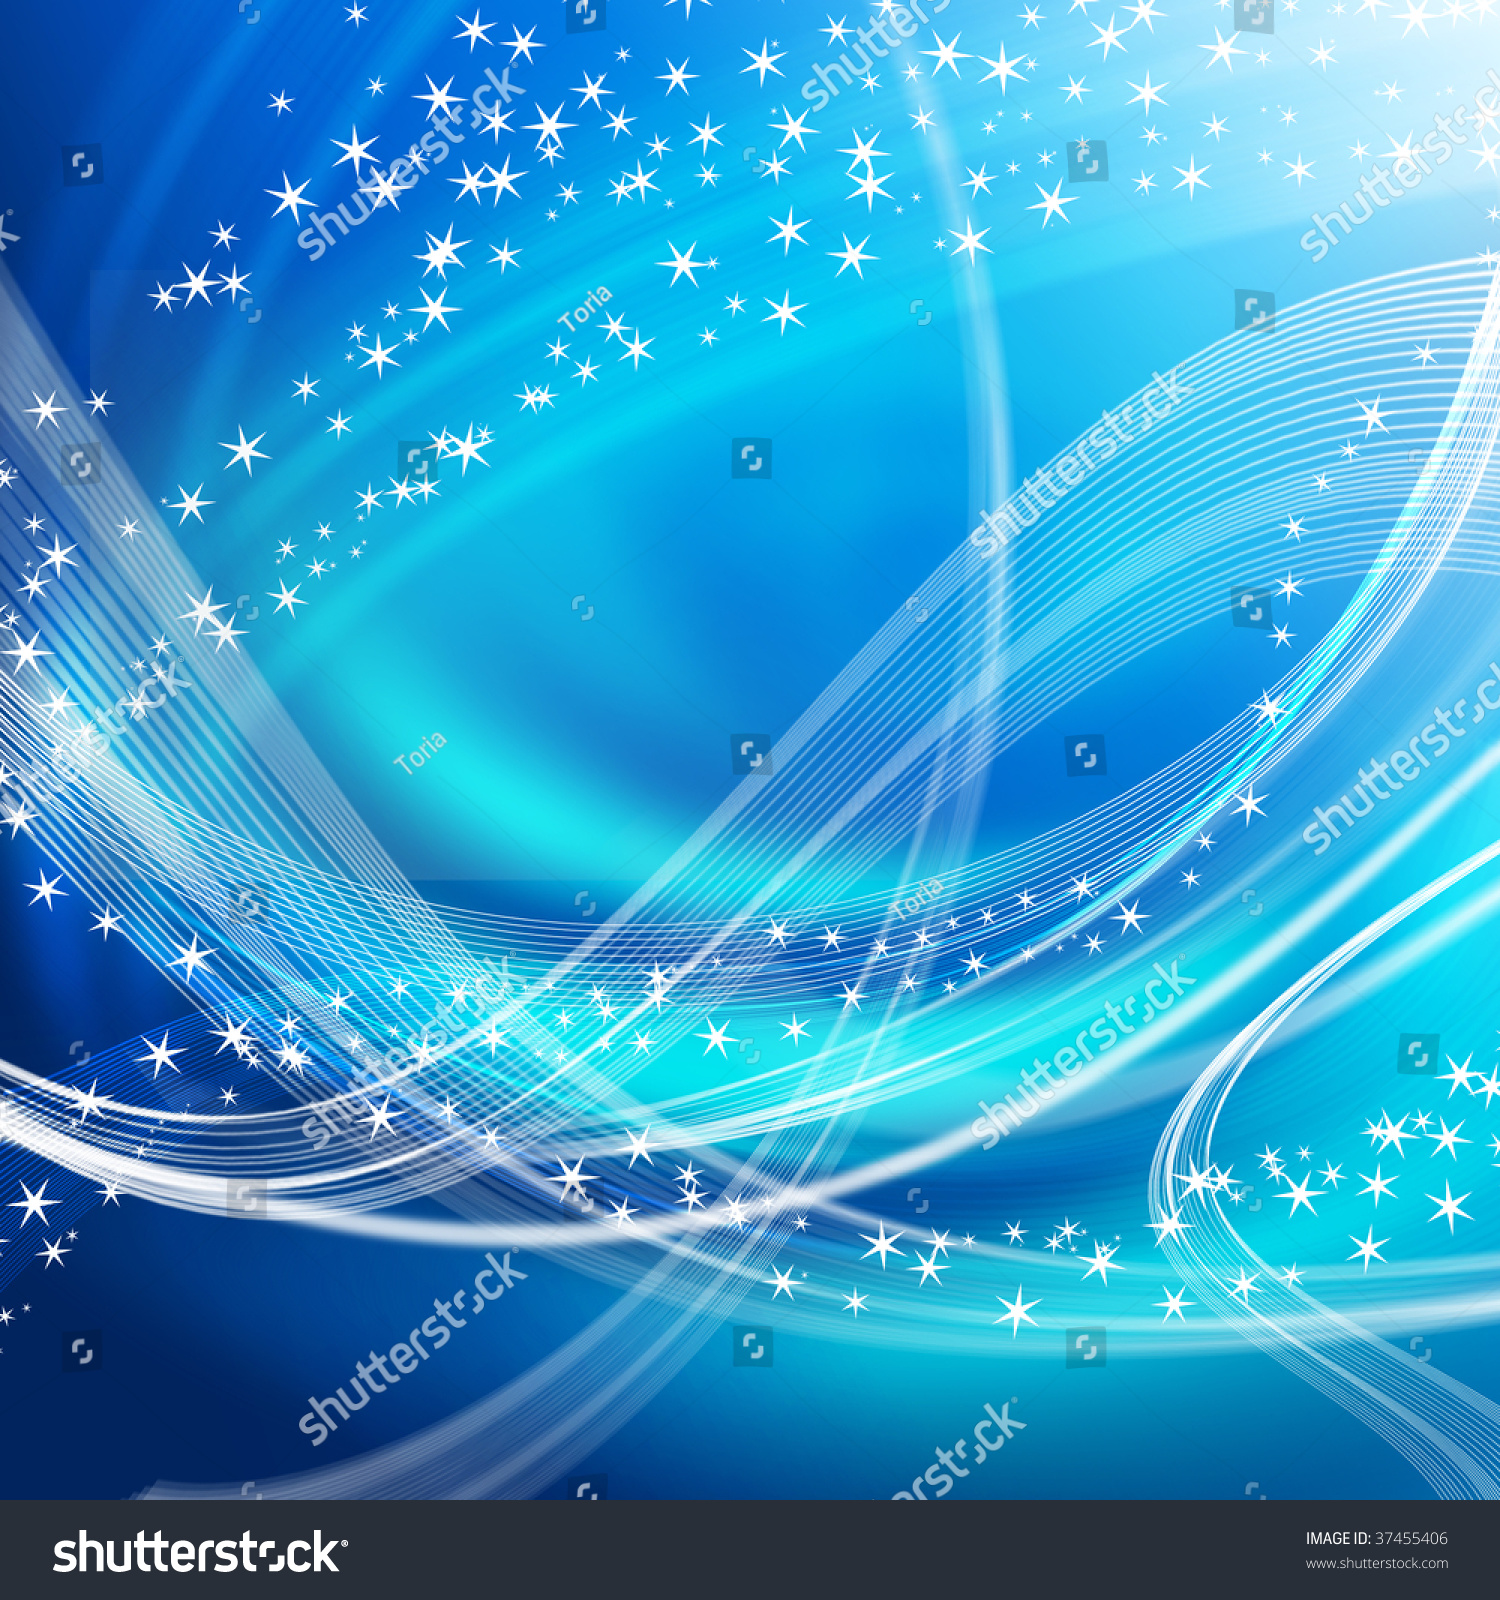 Abstract Light Blue Background Stock Photo 37455406 : Shutterstock